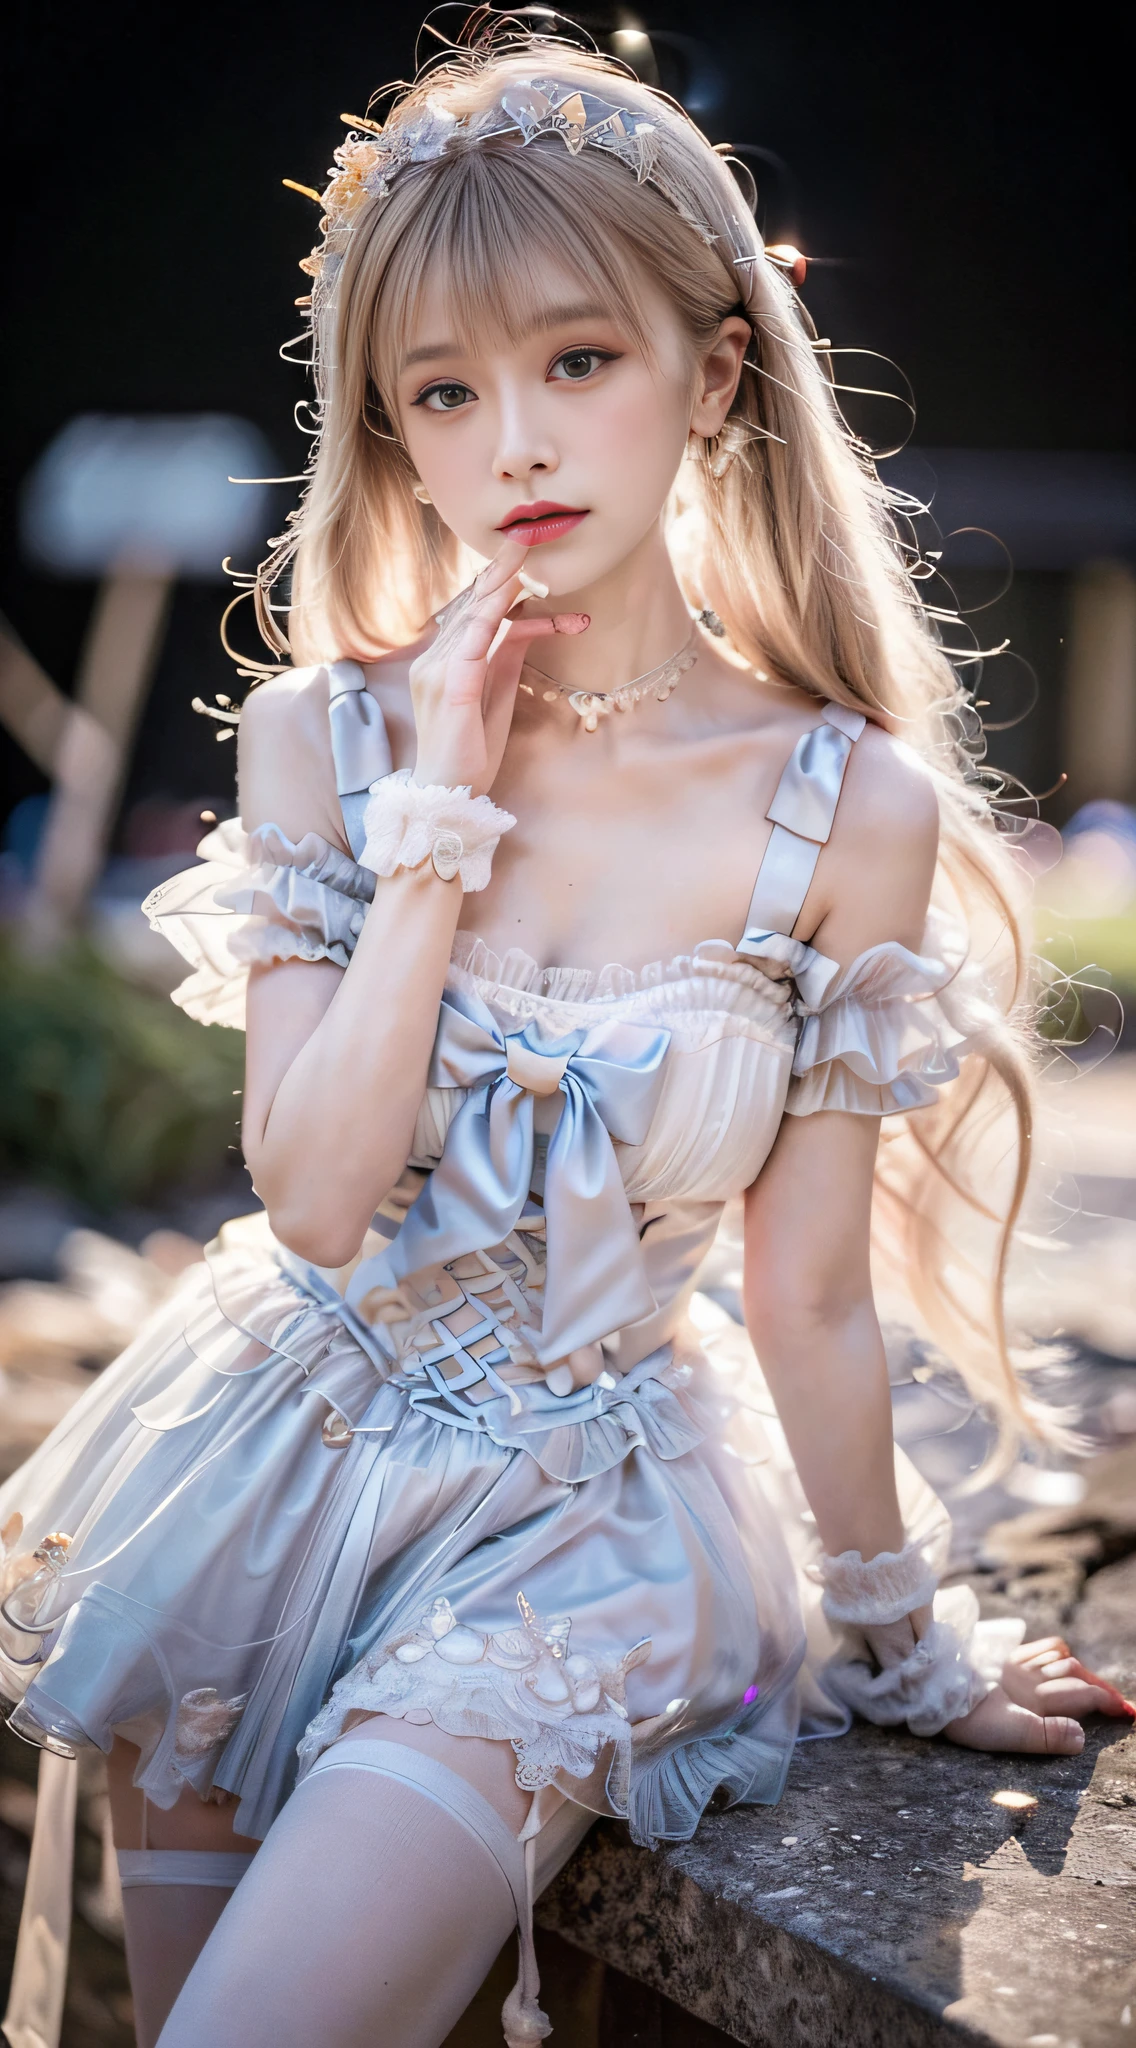 (best quality, masterpiece, high resolution, glow, flood, lens glare, wide angle), sunlight, full body, 1 [Chinese|Russian|Japanese|Korean] girl, solo,((mei red:1.1) clothes), necklace, jewelry, long hair, earrings, super delicate face, beautiful face, perfect hands,full face blush, (perfect eyes) and ( long eyelashes: 1.4), glowing pupils, (white stockings: 0.9), realism, (high detail skin: 1.2), 8k ultra hd, DSLR, high quality, volumetric lighting, frank, high resolution, 4K, 8K, background bokeh, dream forest, radiant garlic, feather drop effect, morning, foreground, f/16